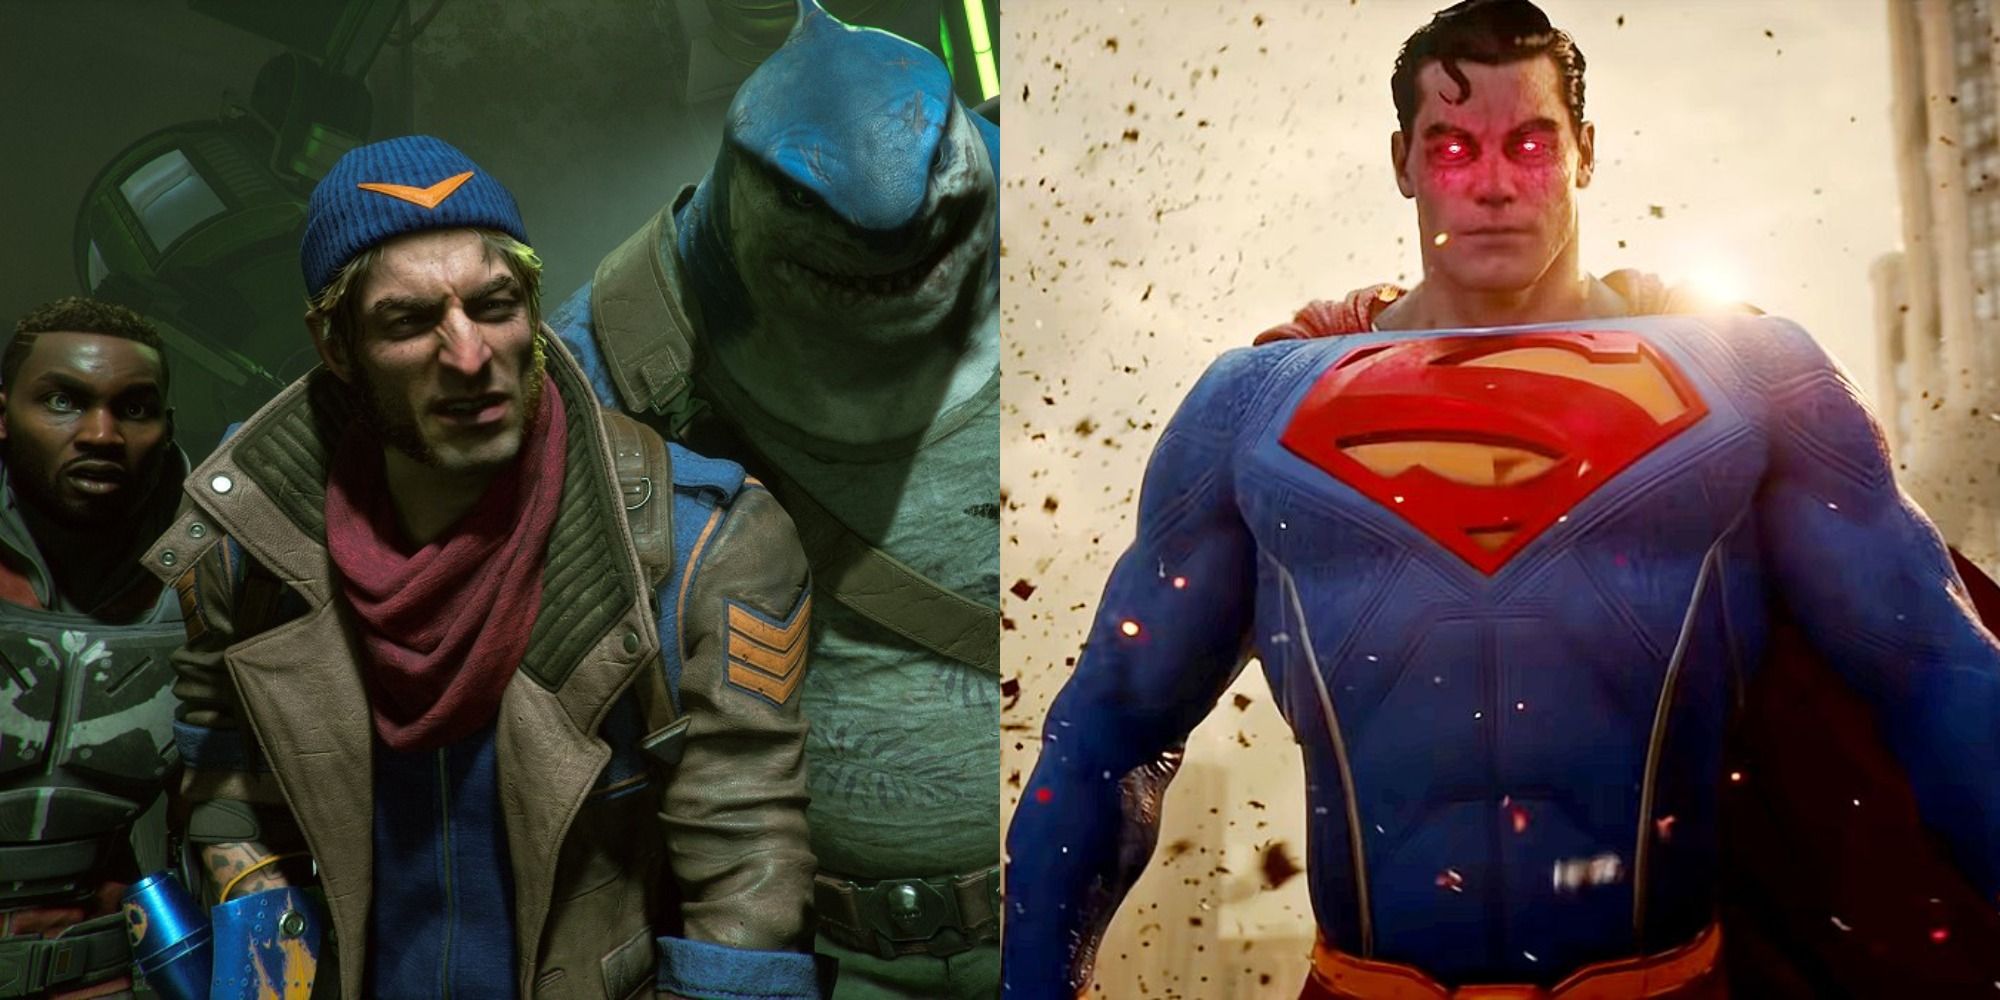 Split image of the Suicide Squad & Superman with glowing red eyes in Suicide Squad: Kill the Justice League.